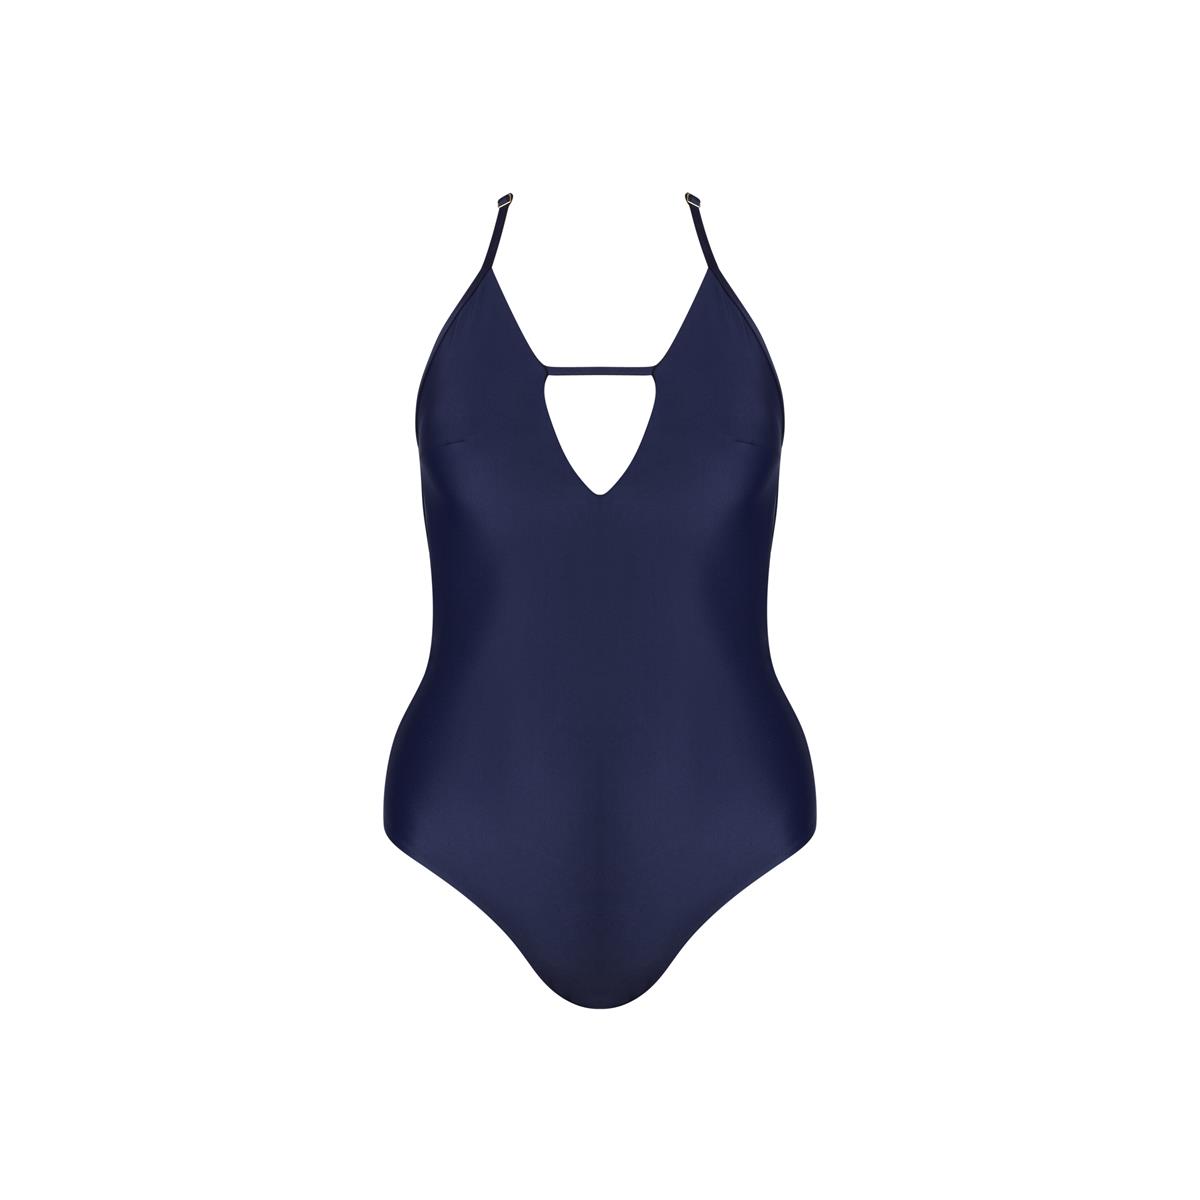 MARGARET AND HERMIONE_SS19_Swimsuit No.2_night_EUR 154,00